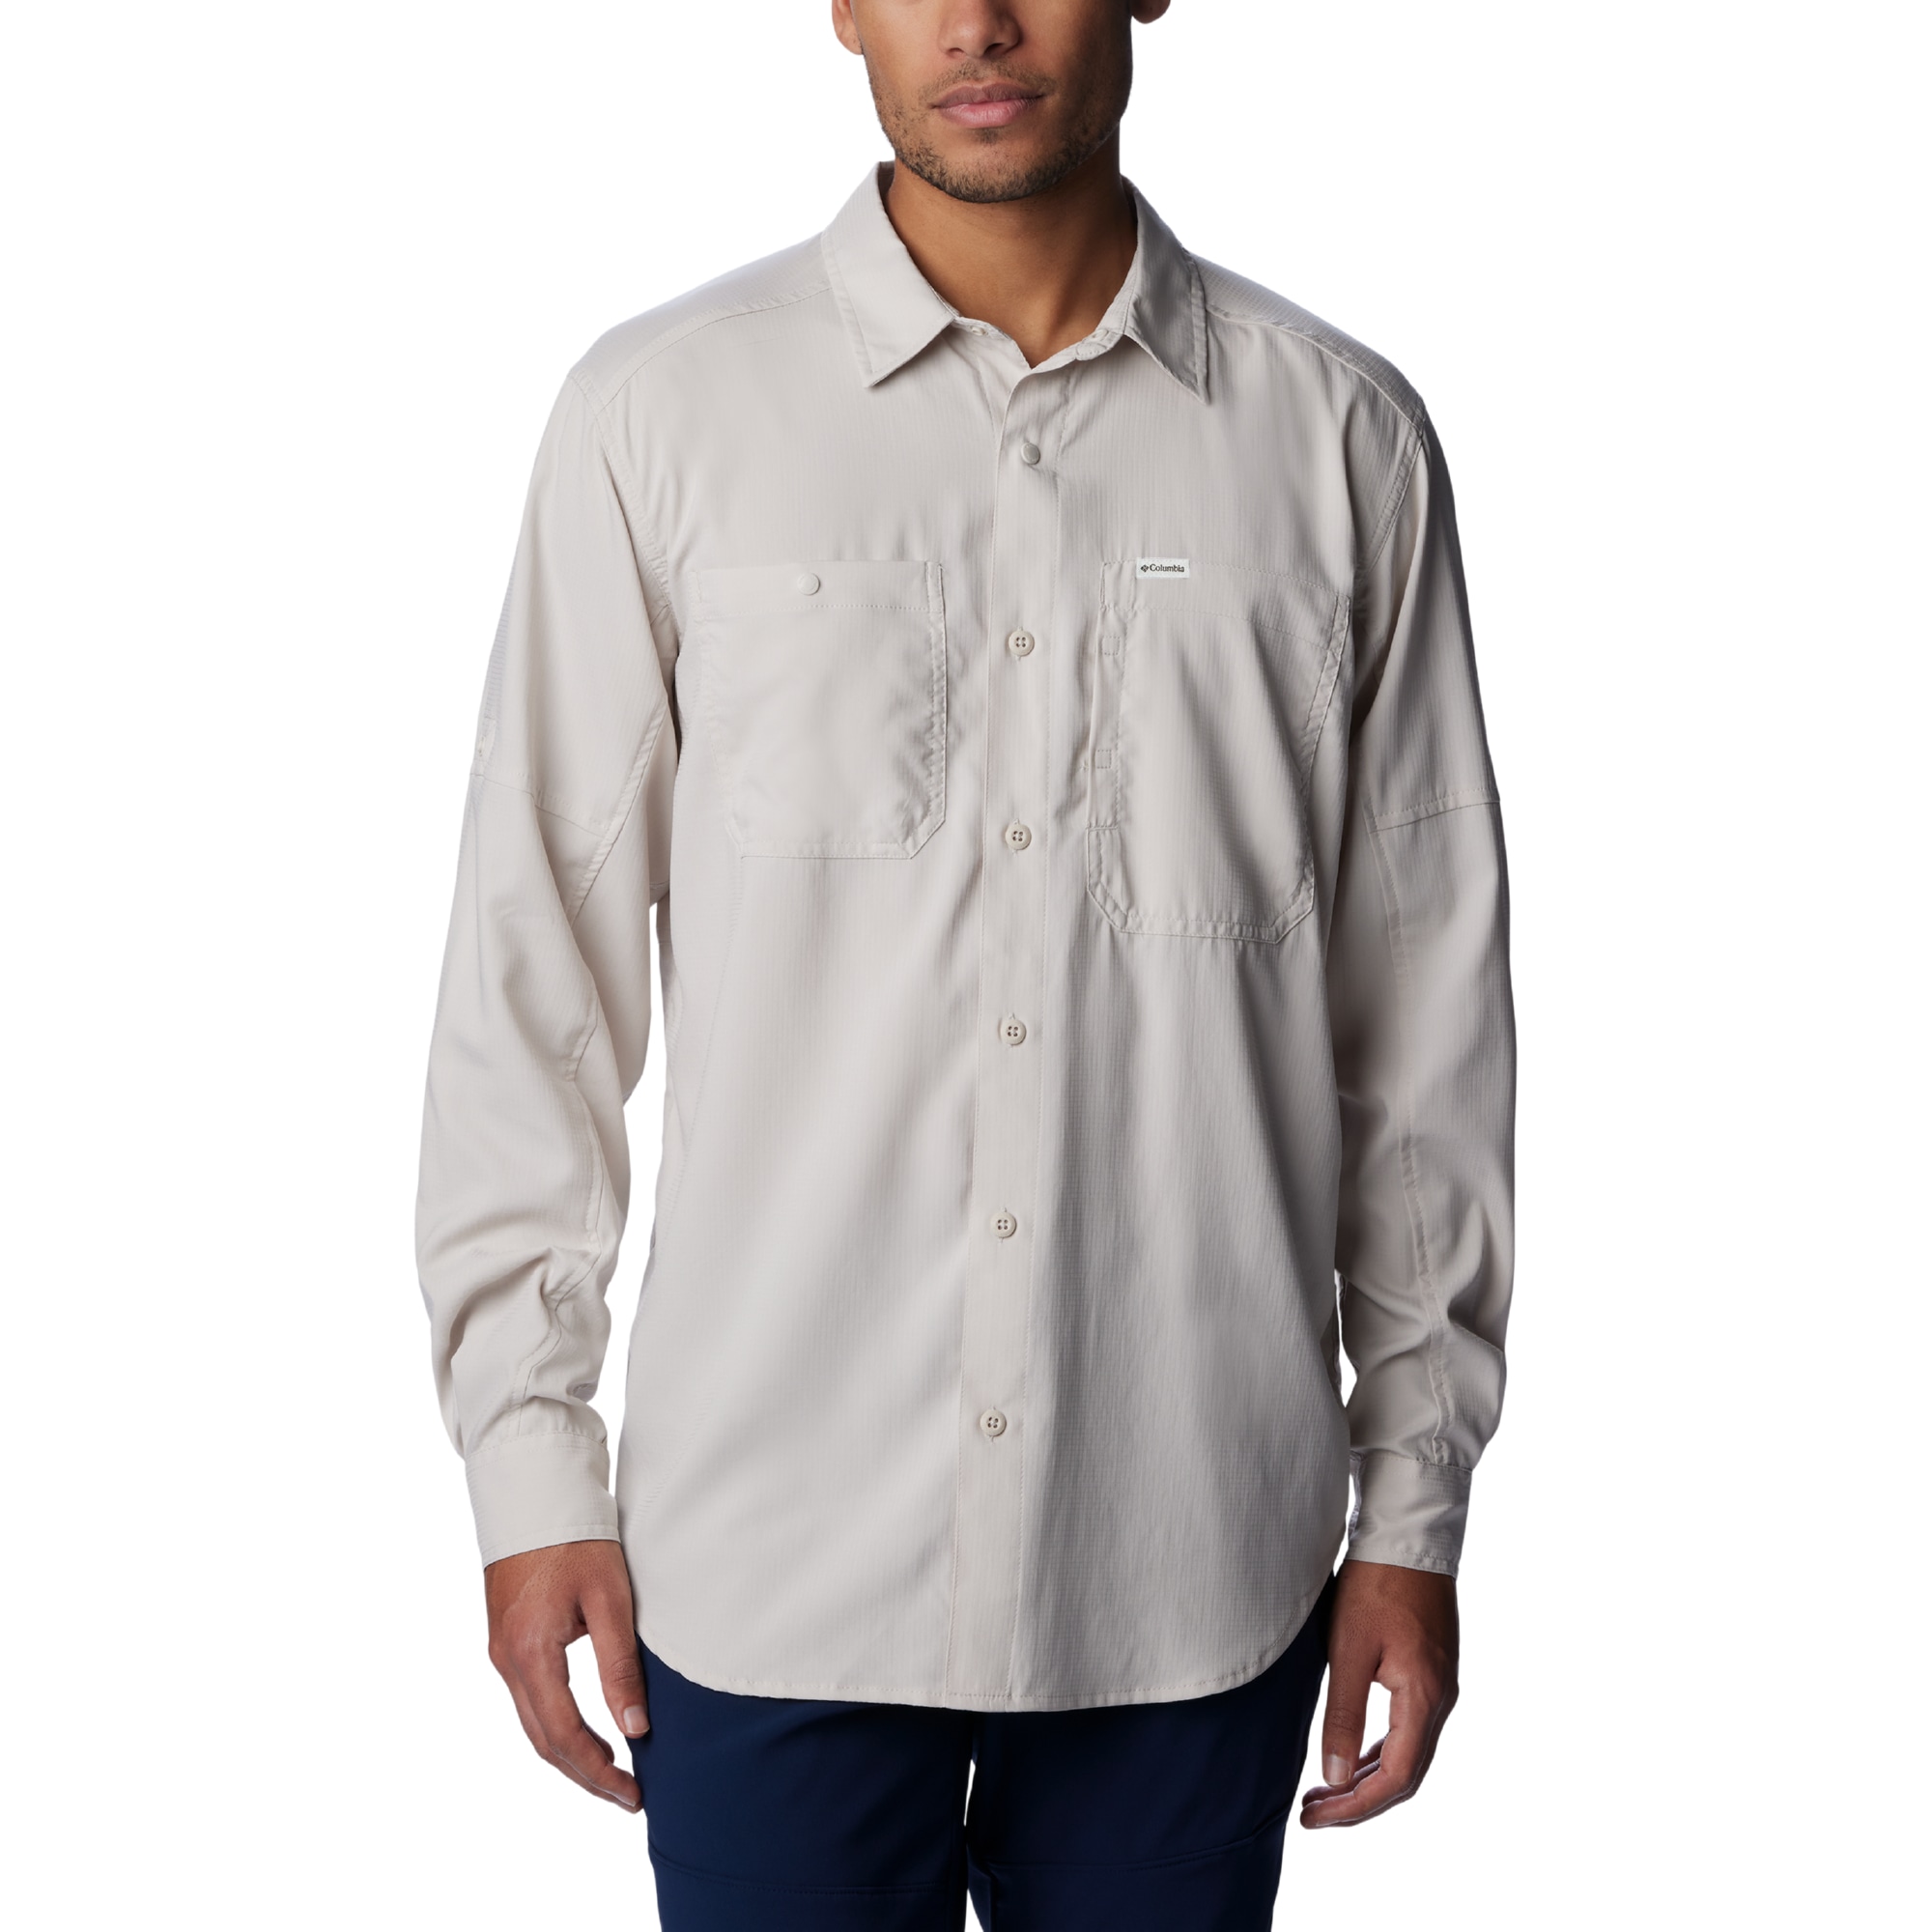 Men's 100% Cotton Breathable Fishing Shirts & Tops for sale, Shop with  Afterpay